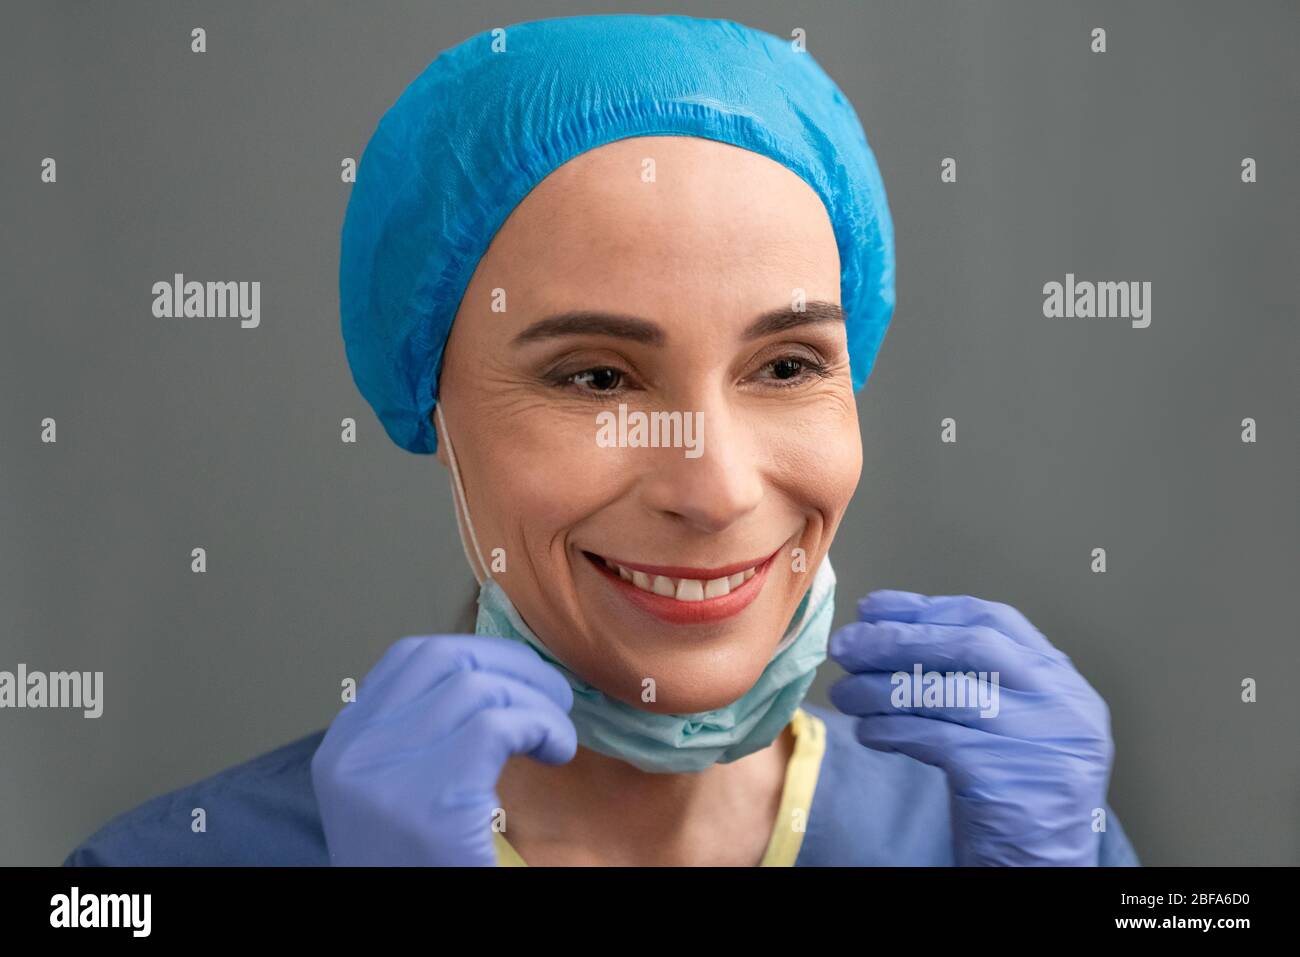 Female medical worker smiles removing surgical mask Stock Photo